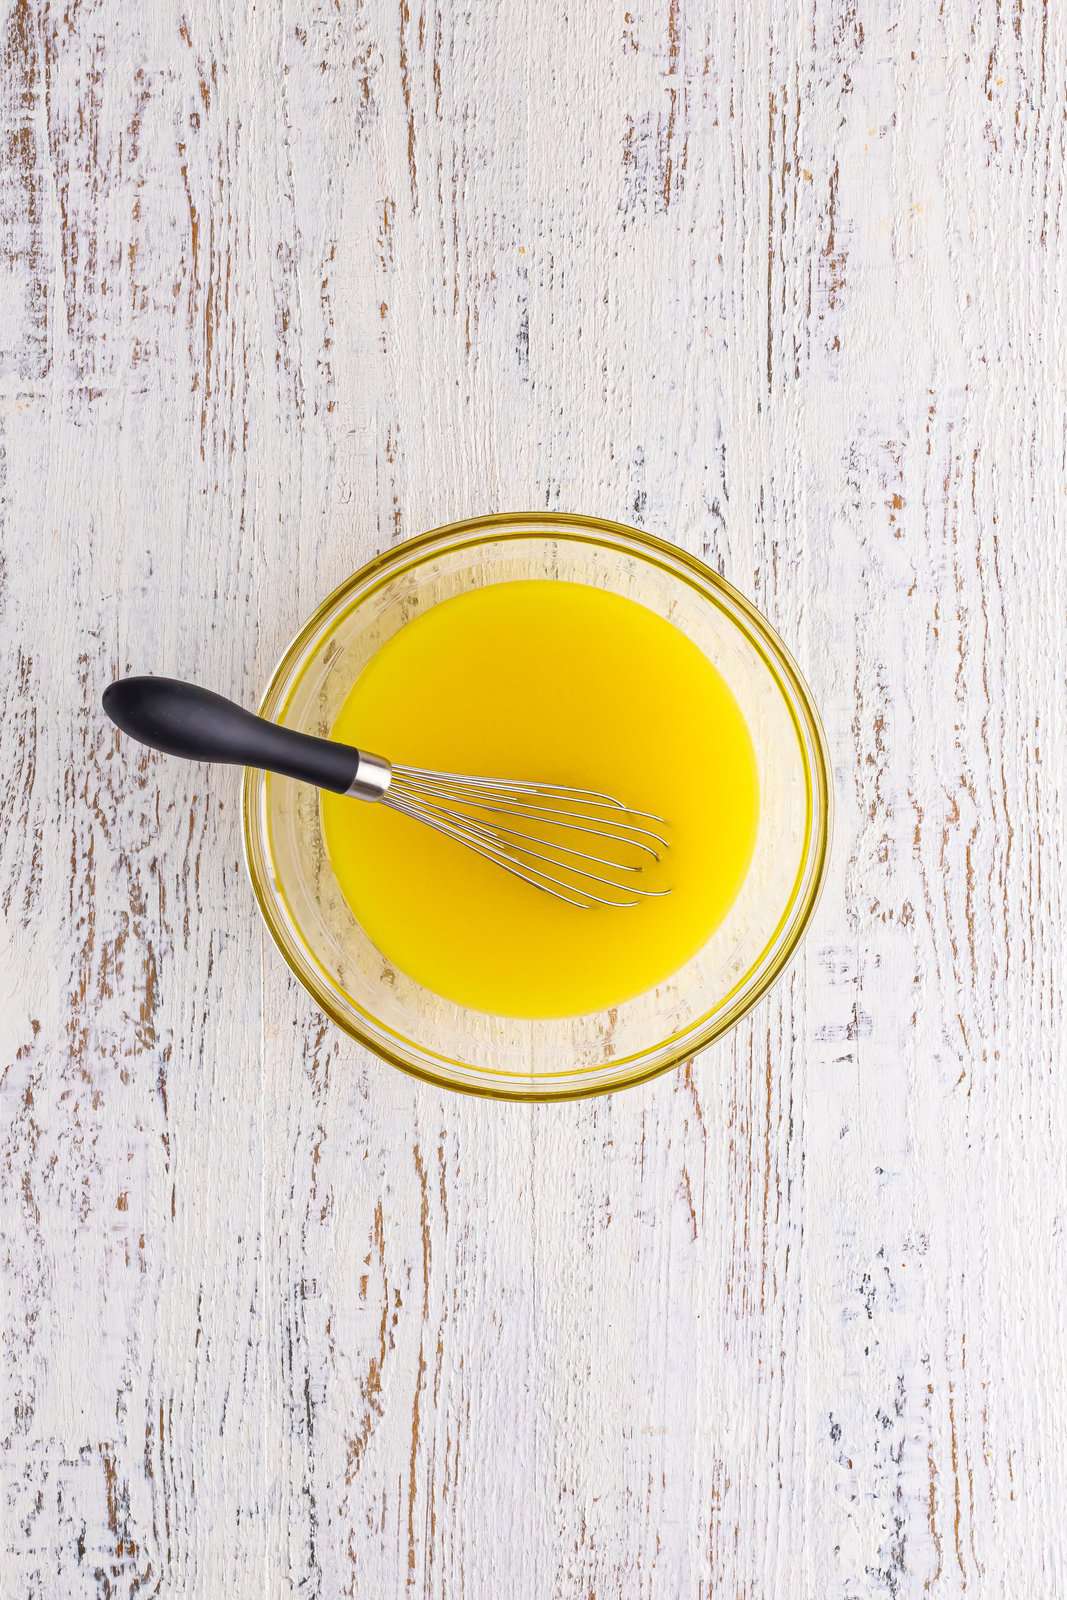 Whisk in a bowl of pineapple jello mix.